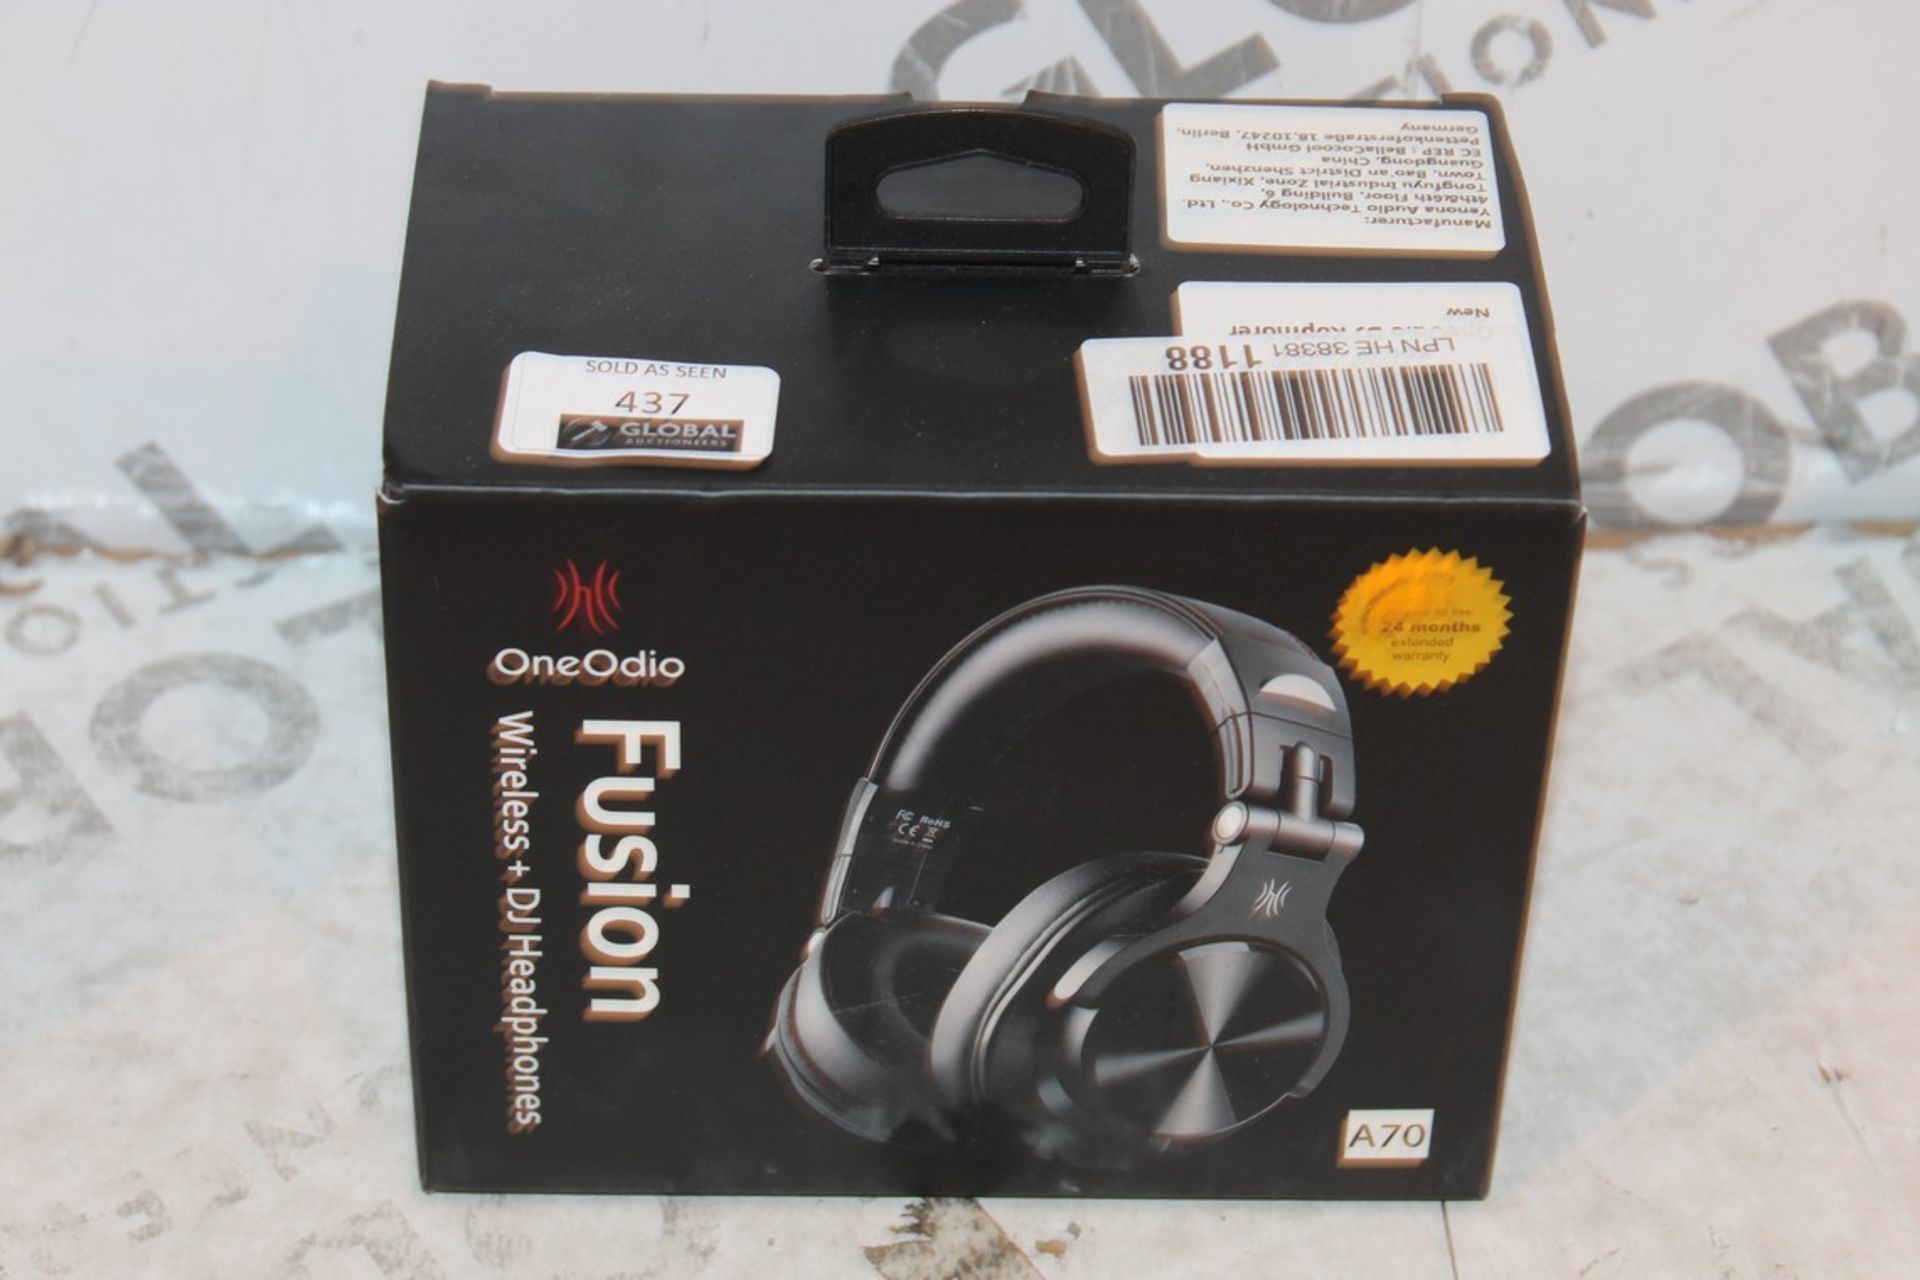 Lot to Contain 3 Pairs of One Odio Fushion A70 Black Wireless DJ Headphones RRP £105 Combined (